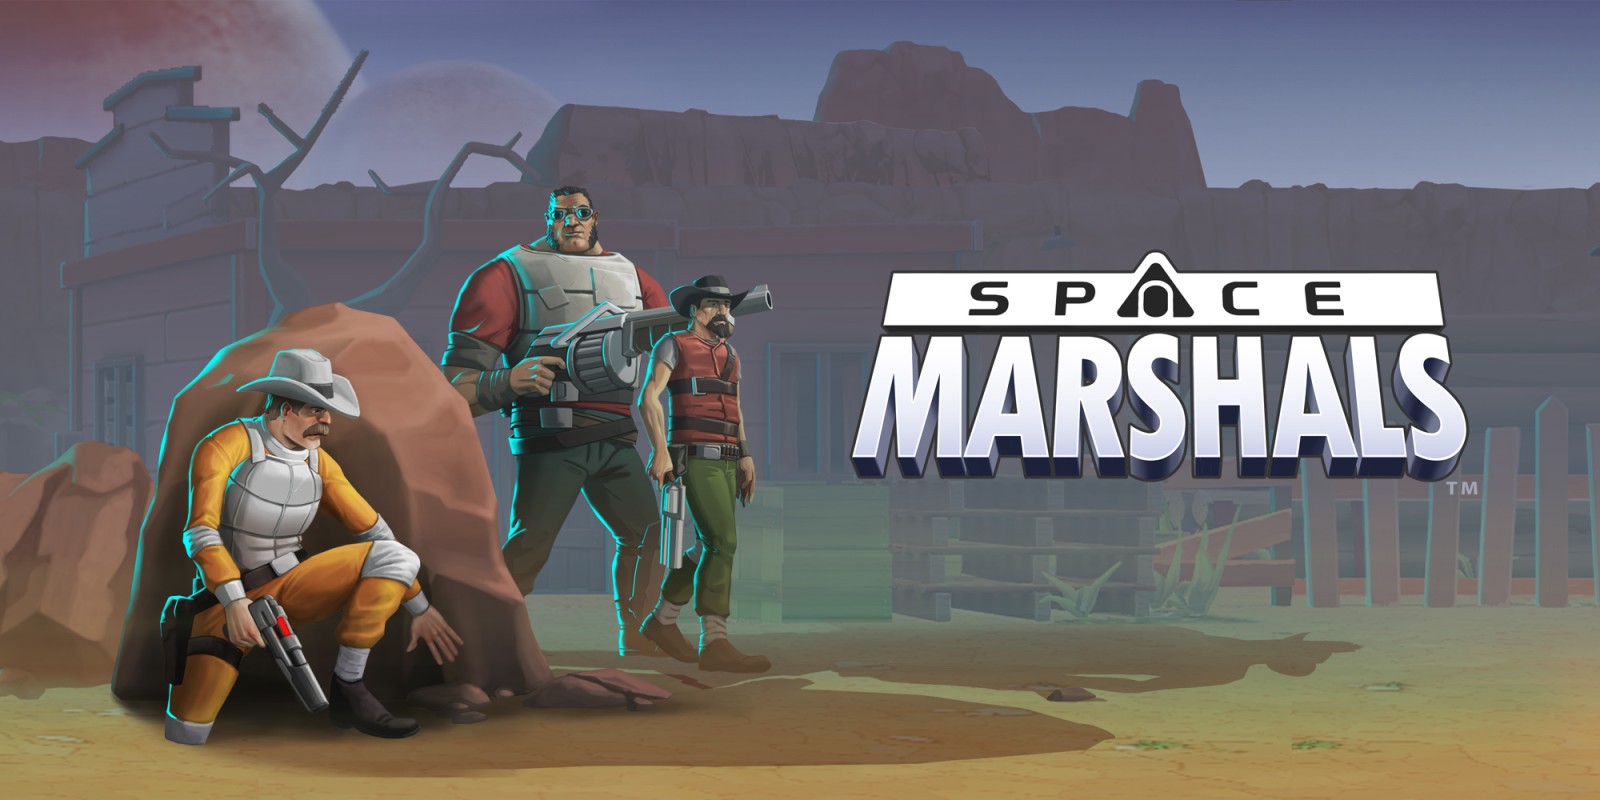 space marshals 3 pc